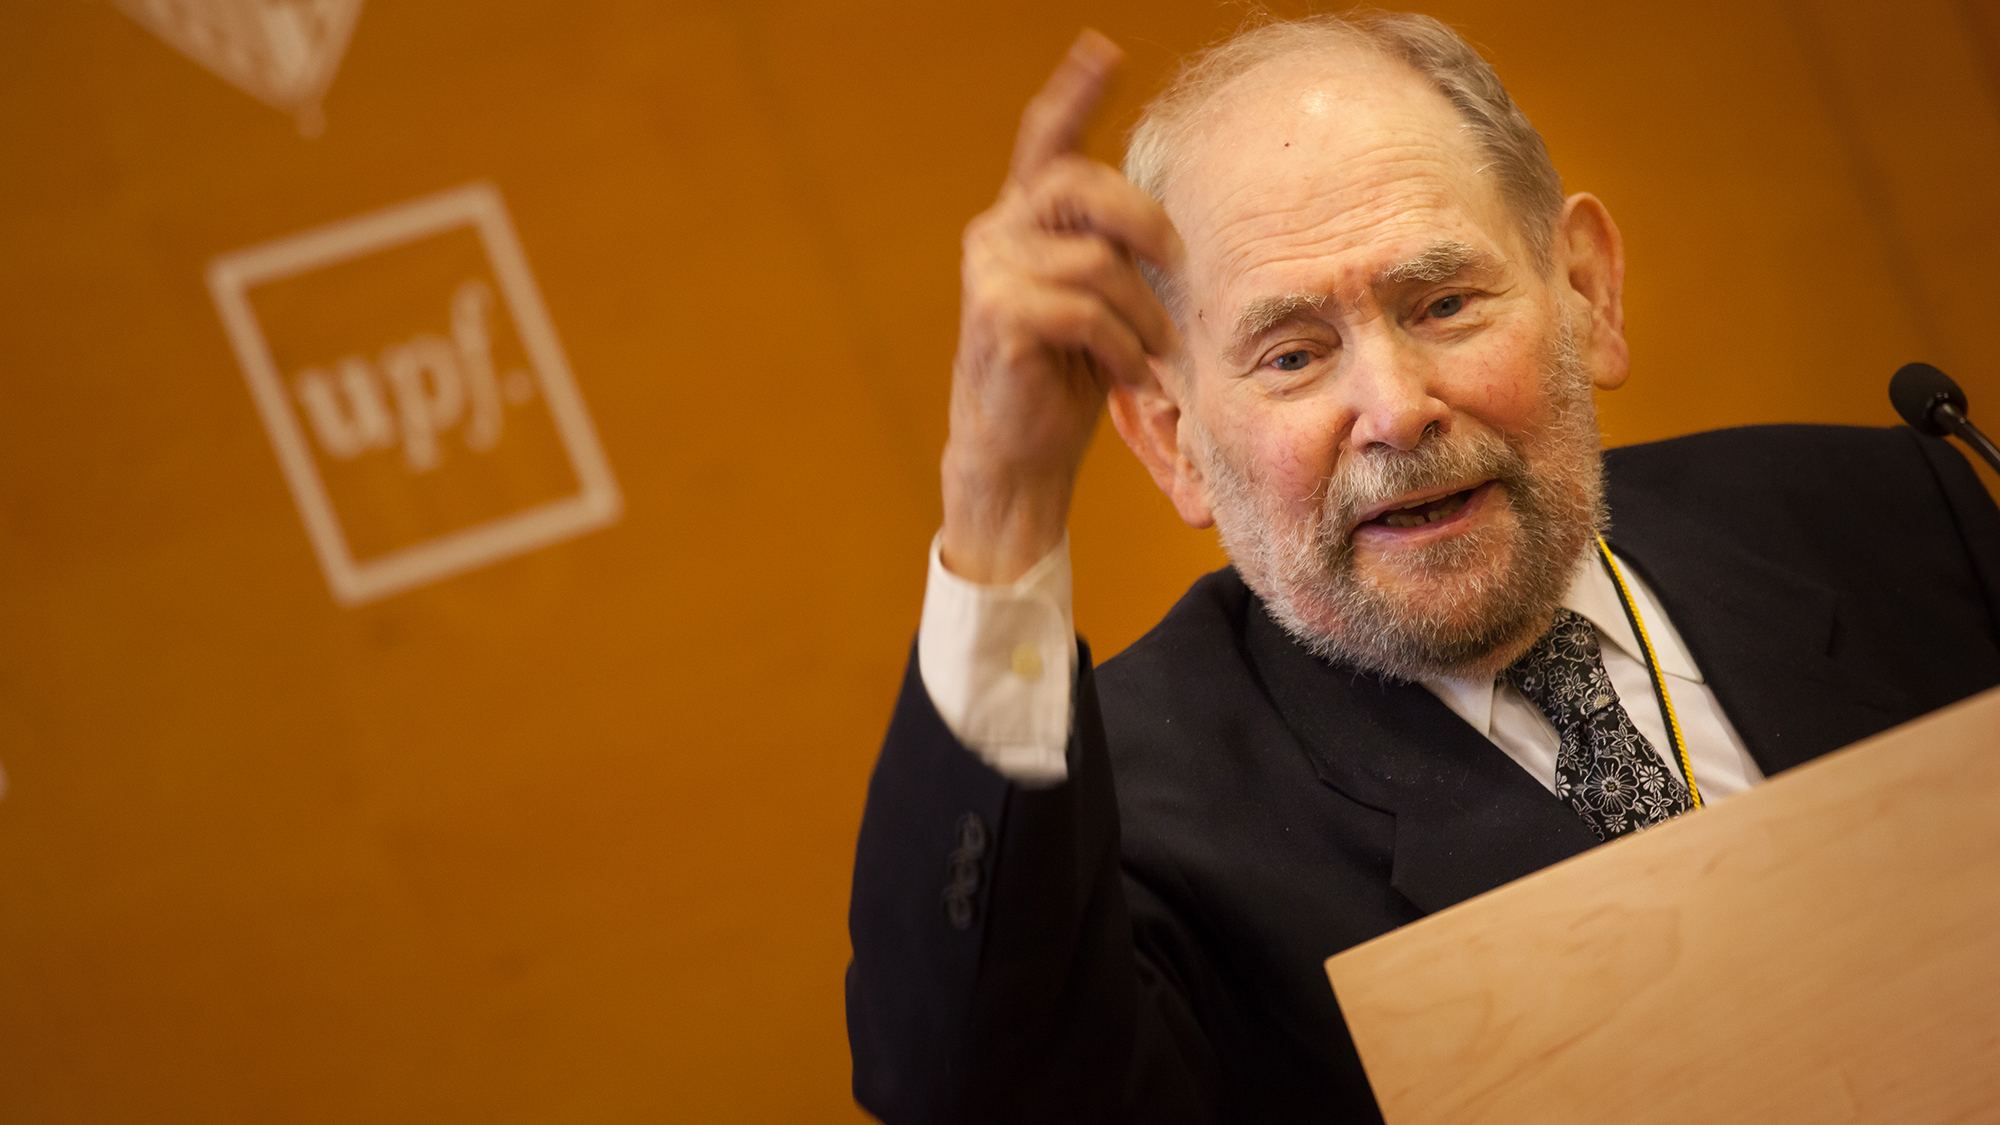 The Nobel Prize Sydney Brenner during his speech at the PRBB Auditorium. Photo by Frederic Camallonga.